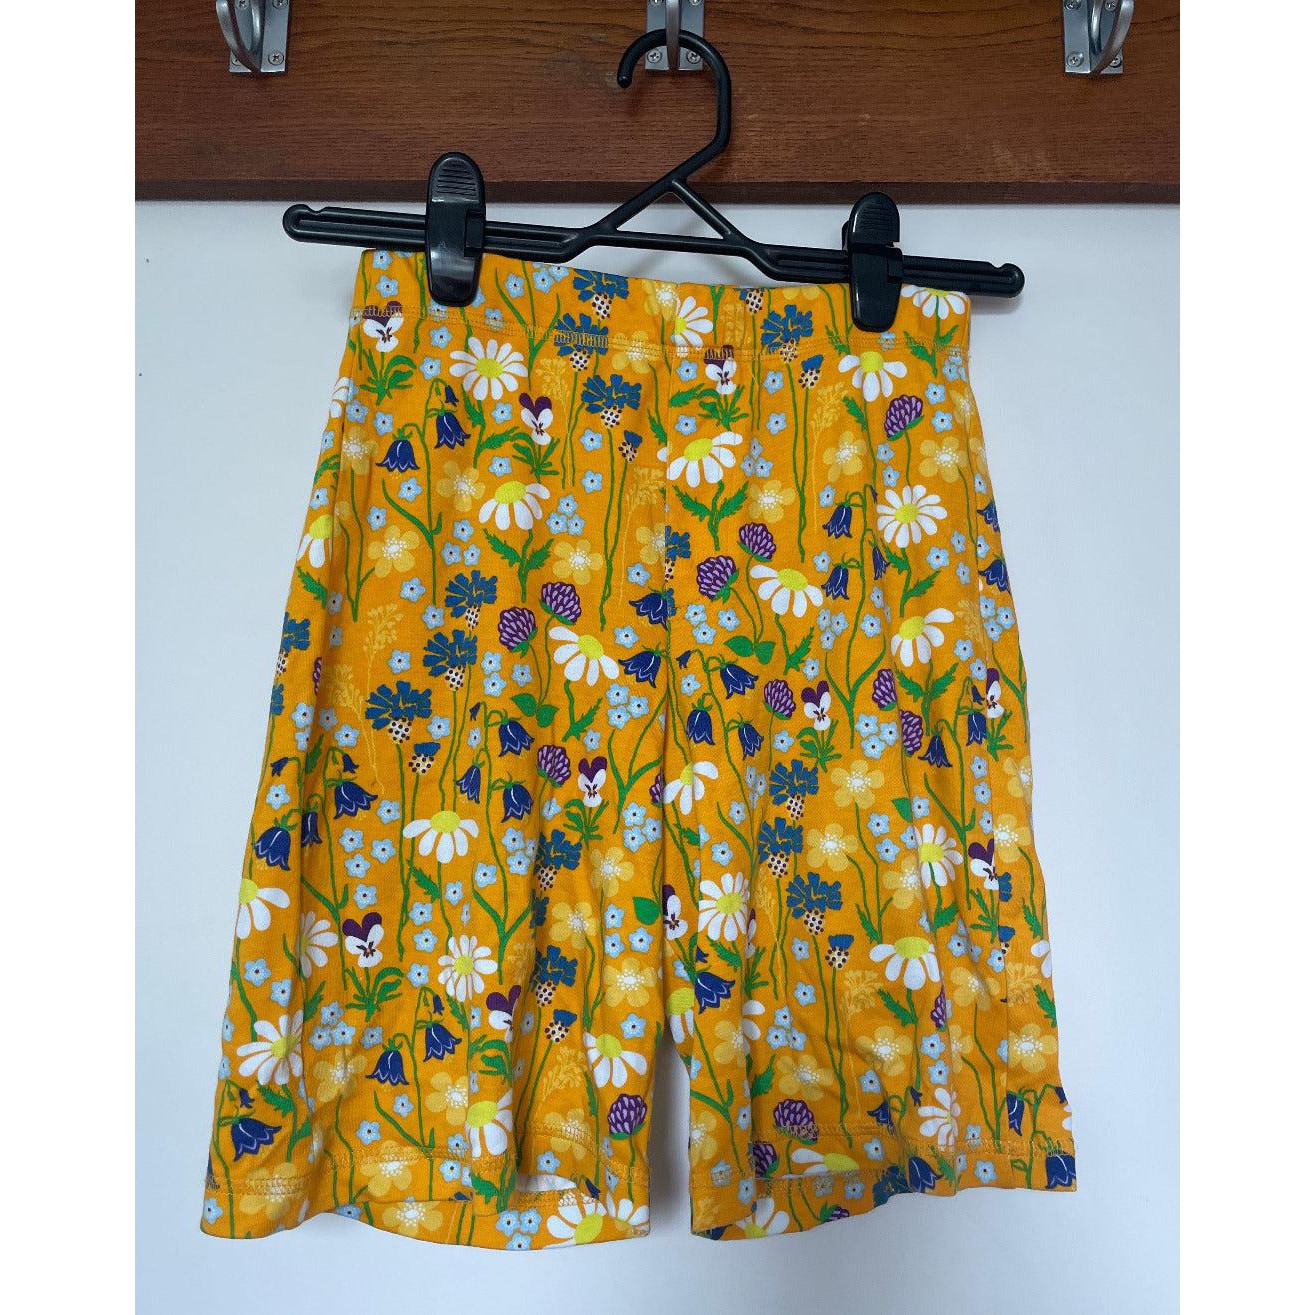 Duns Sweden - RE-Loved - Midsummer Flowers Shorts (Yellow) (10-12 Years)